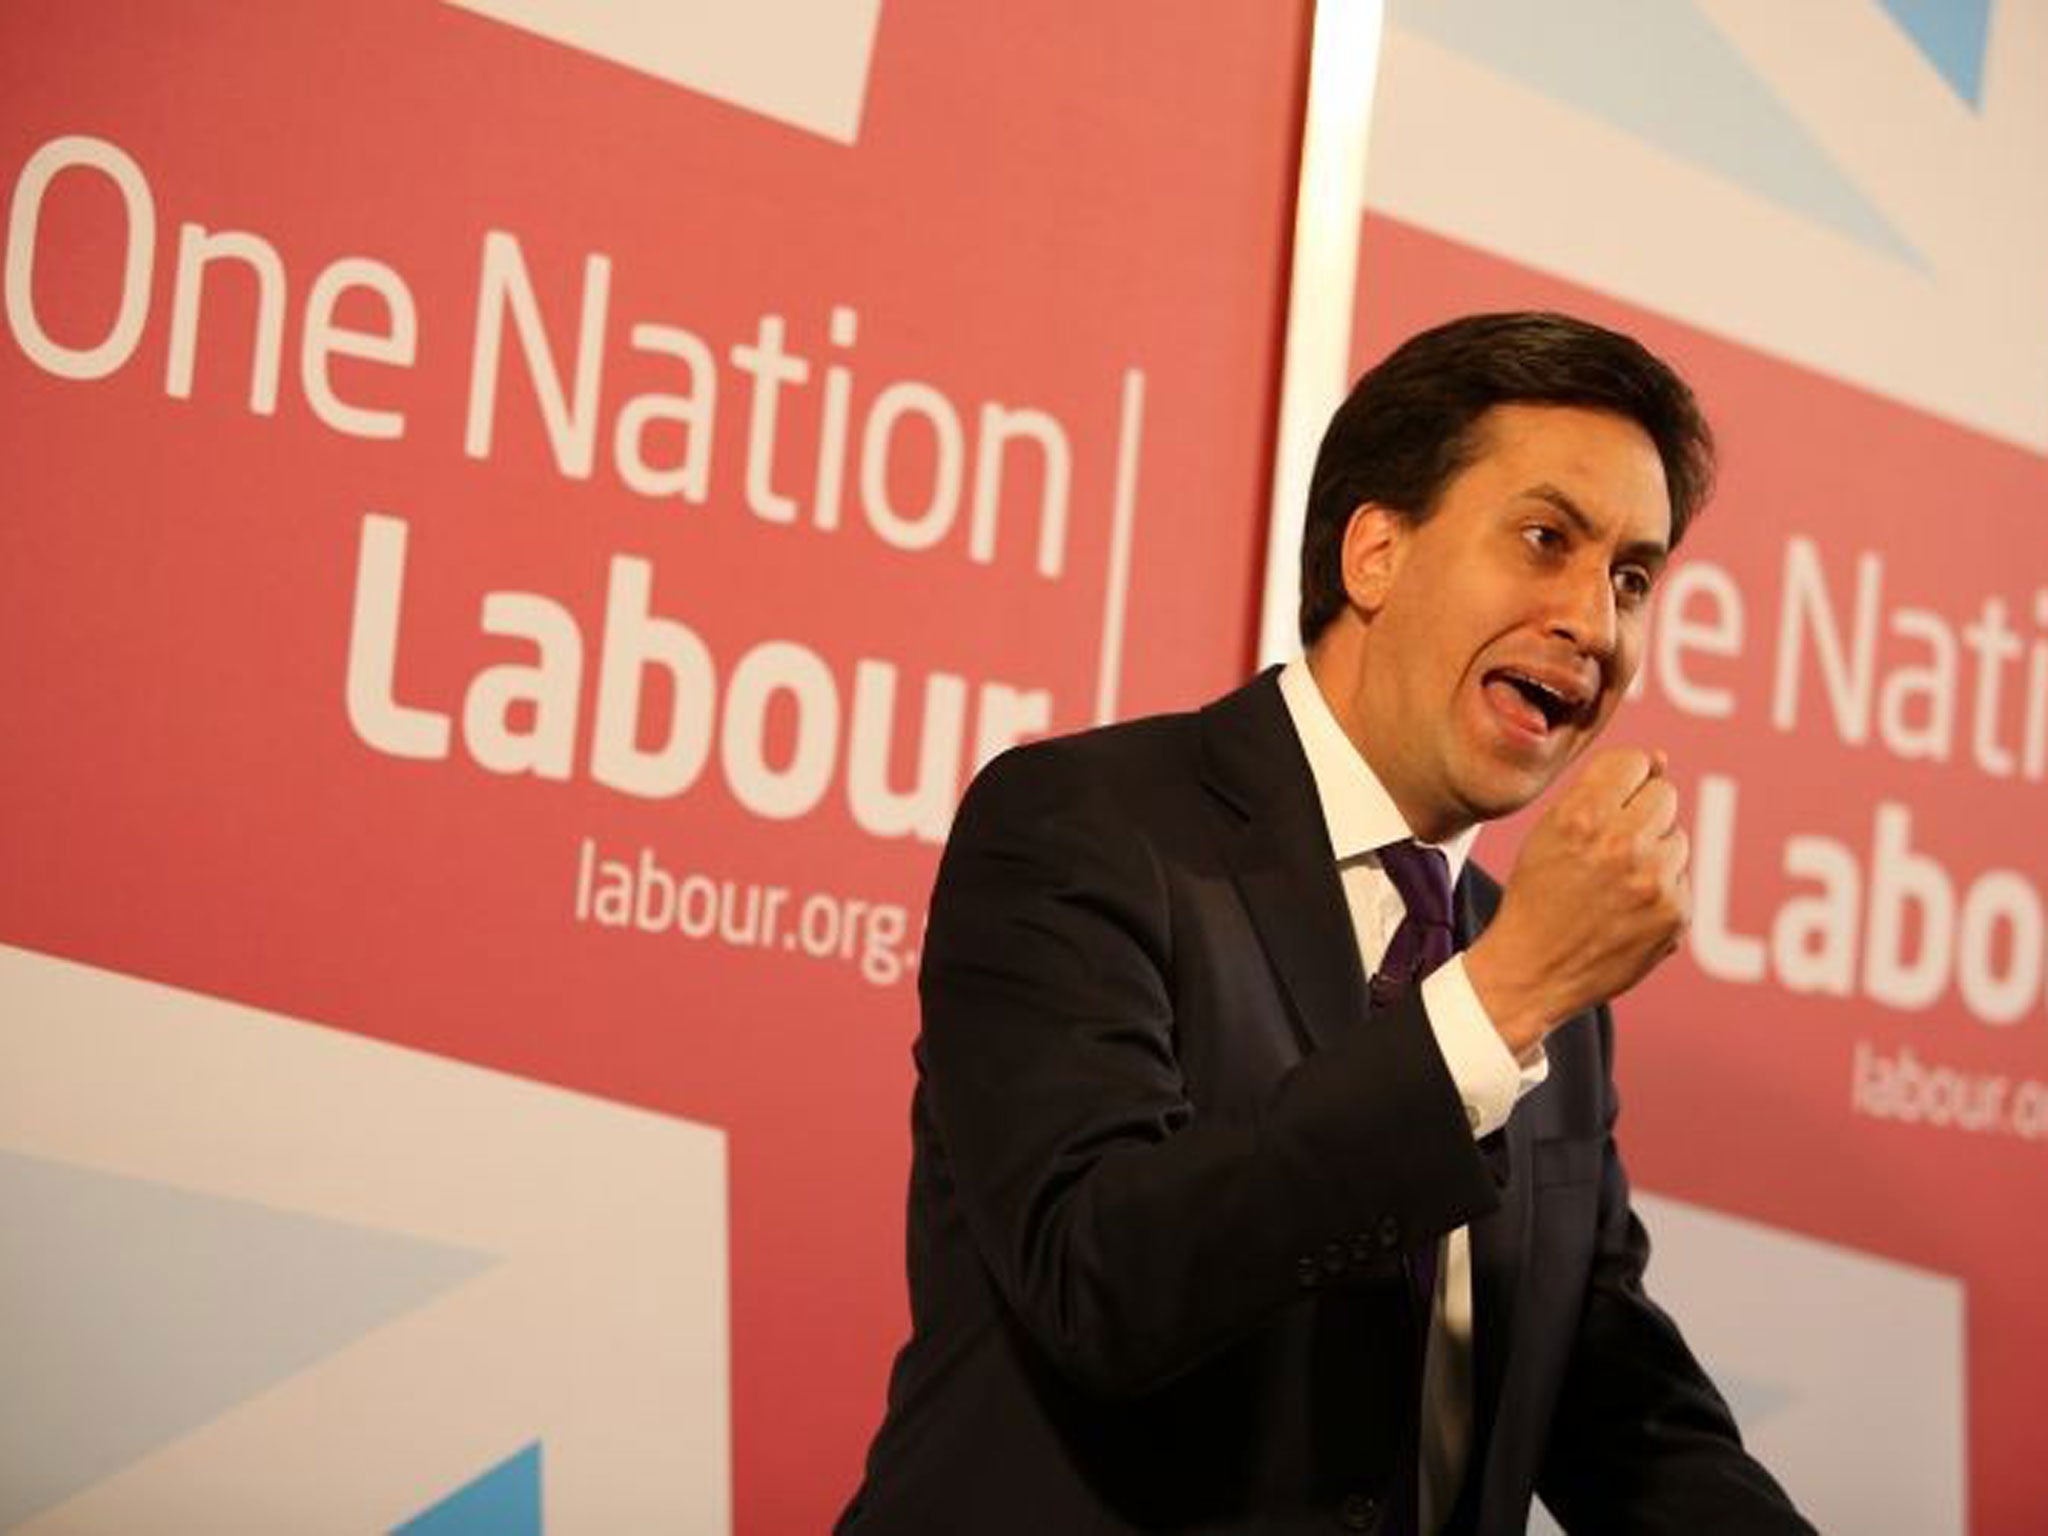 All change: Reform plans proposed by Labour leader Ed Miliband could exclude far left candidates, say union activists